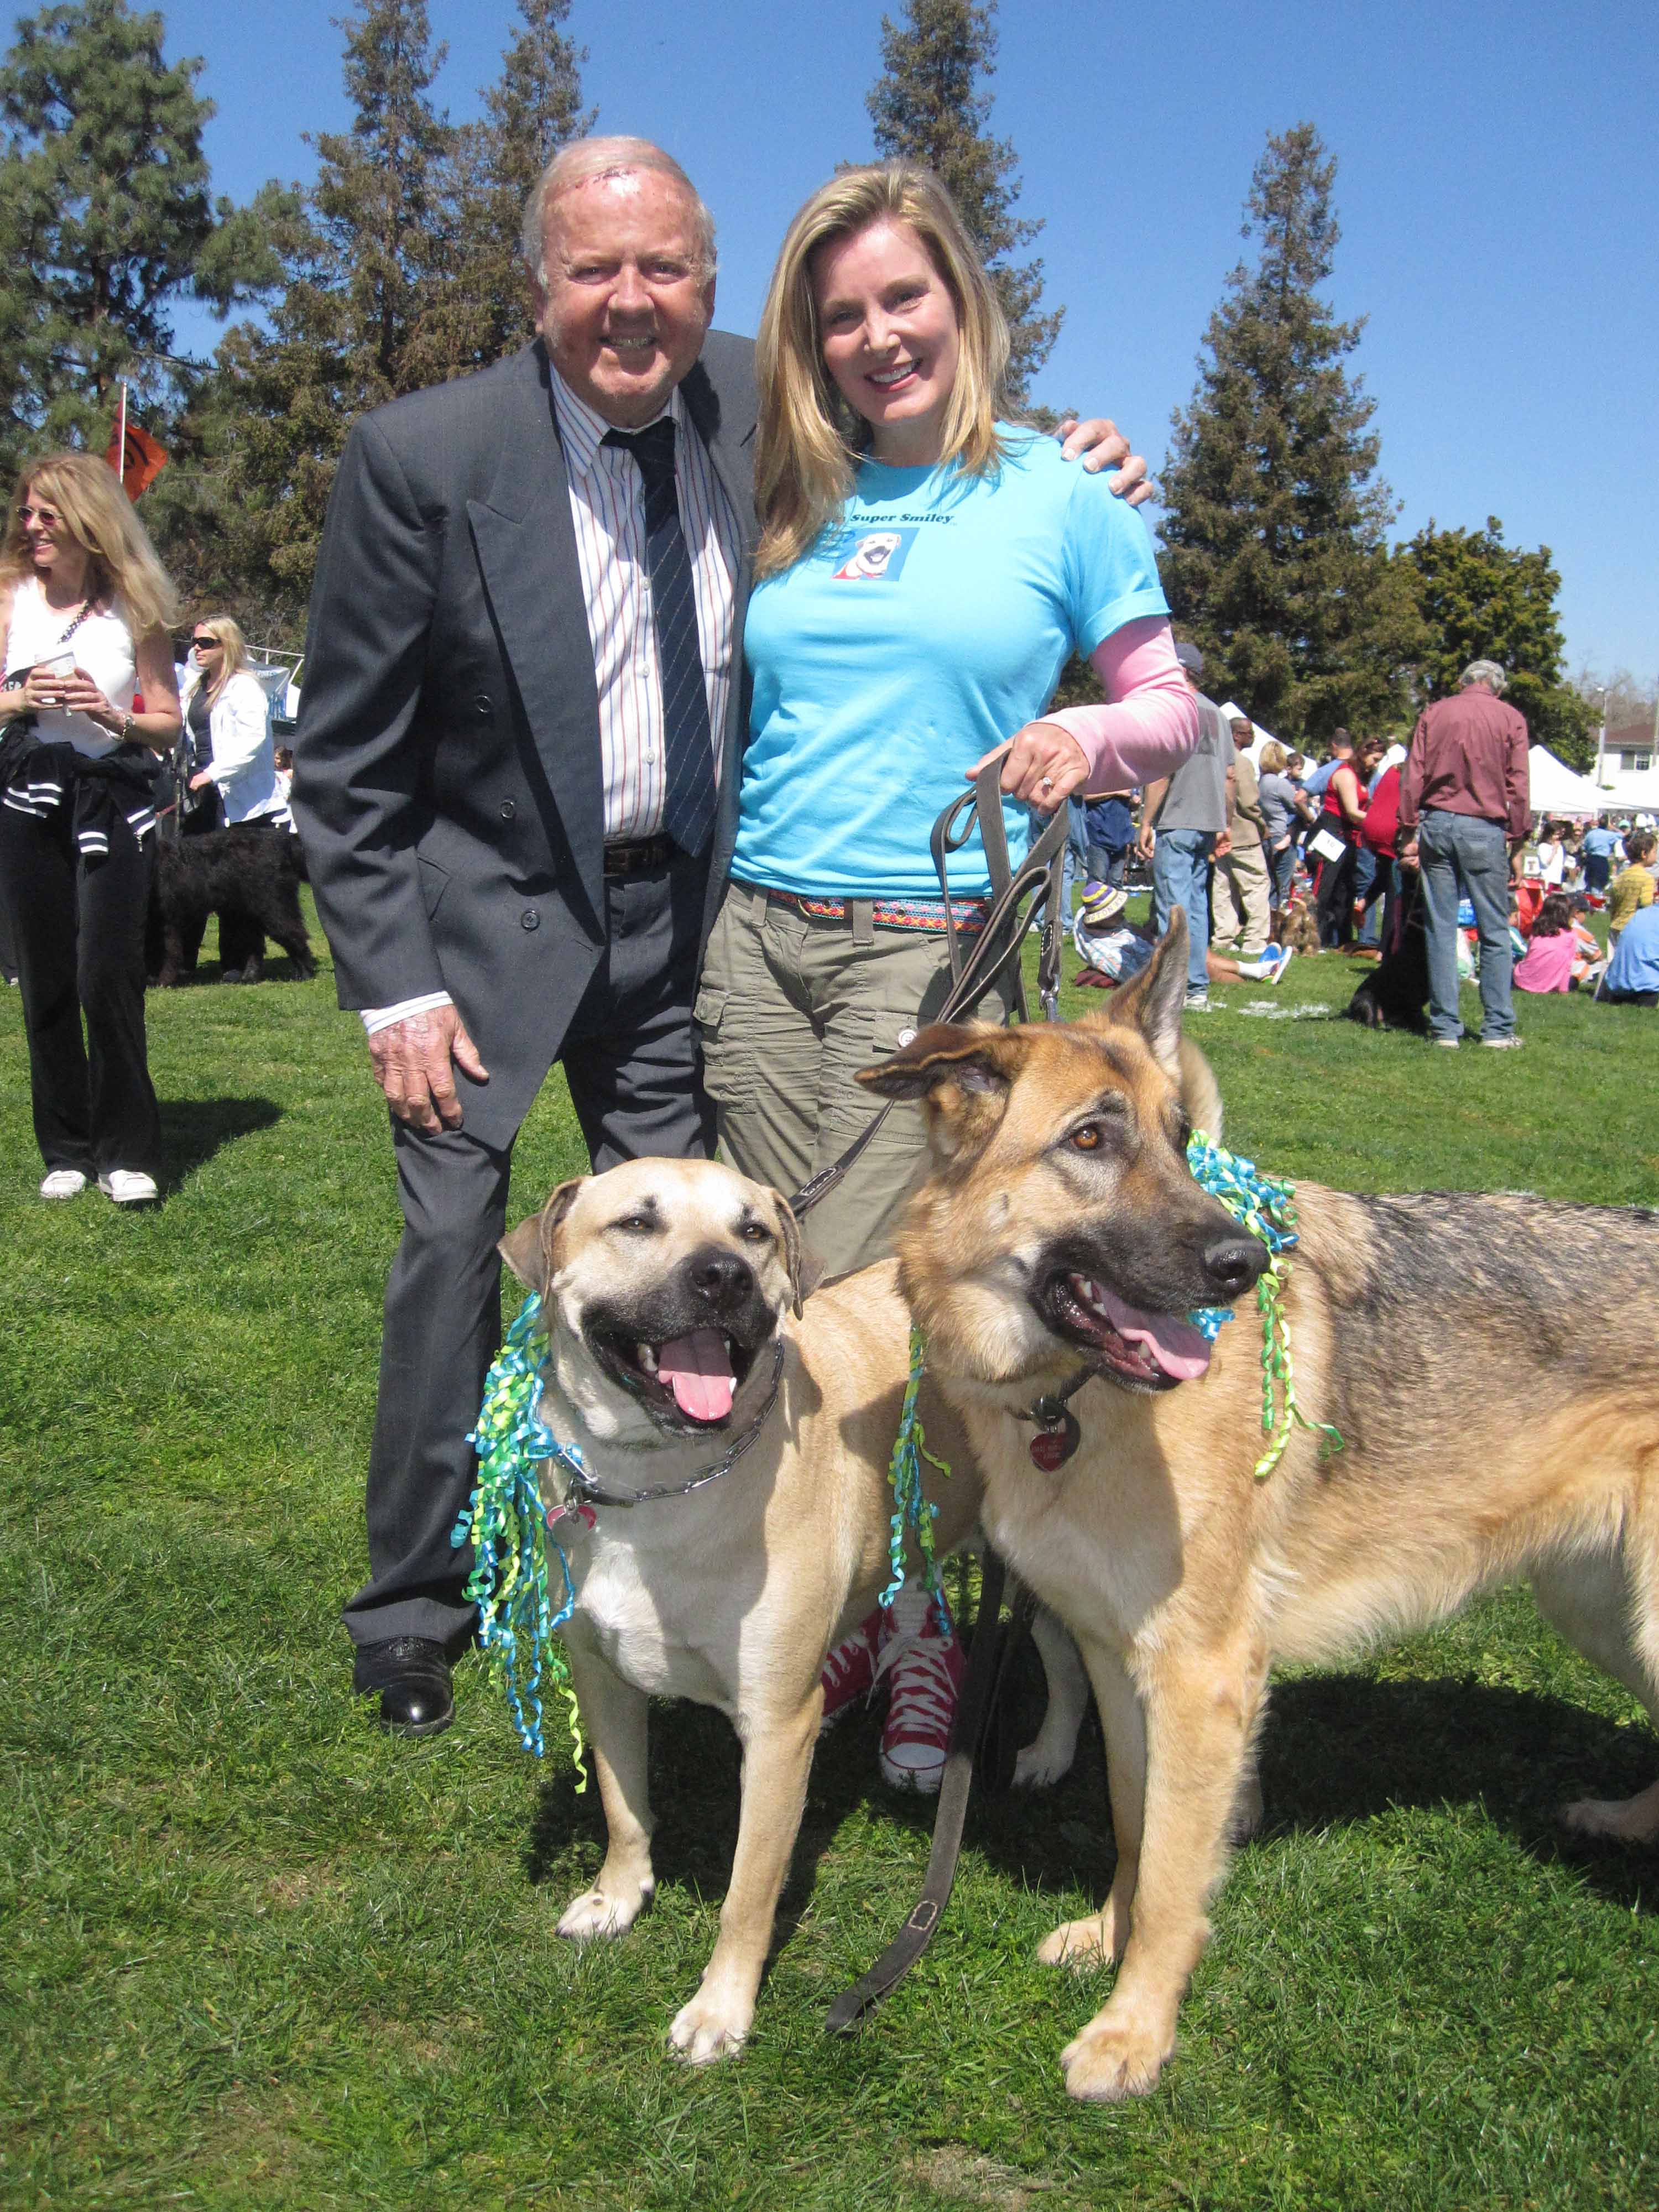 Dick Van Patten, Angel, Smiley and Megan Blake at Woofstock. Megan was the event host with Super Smiley